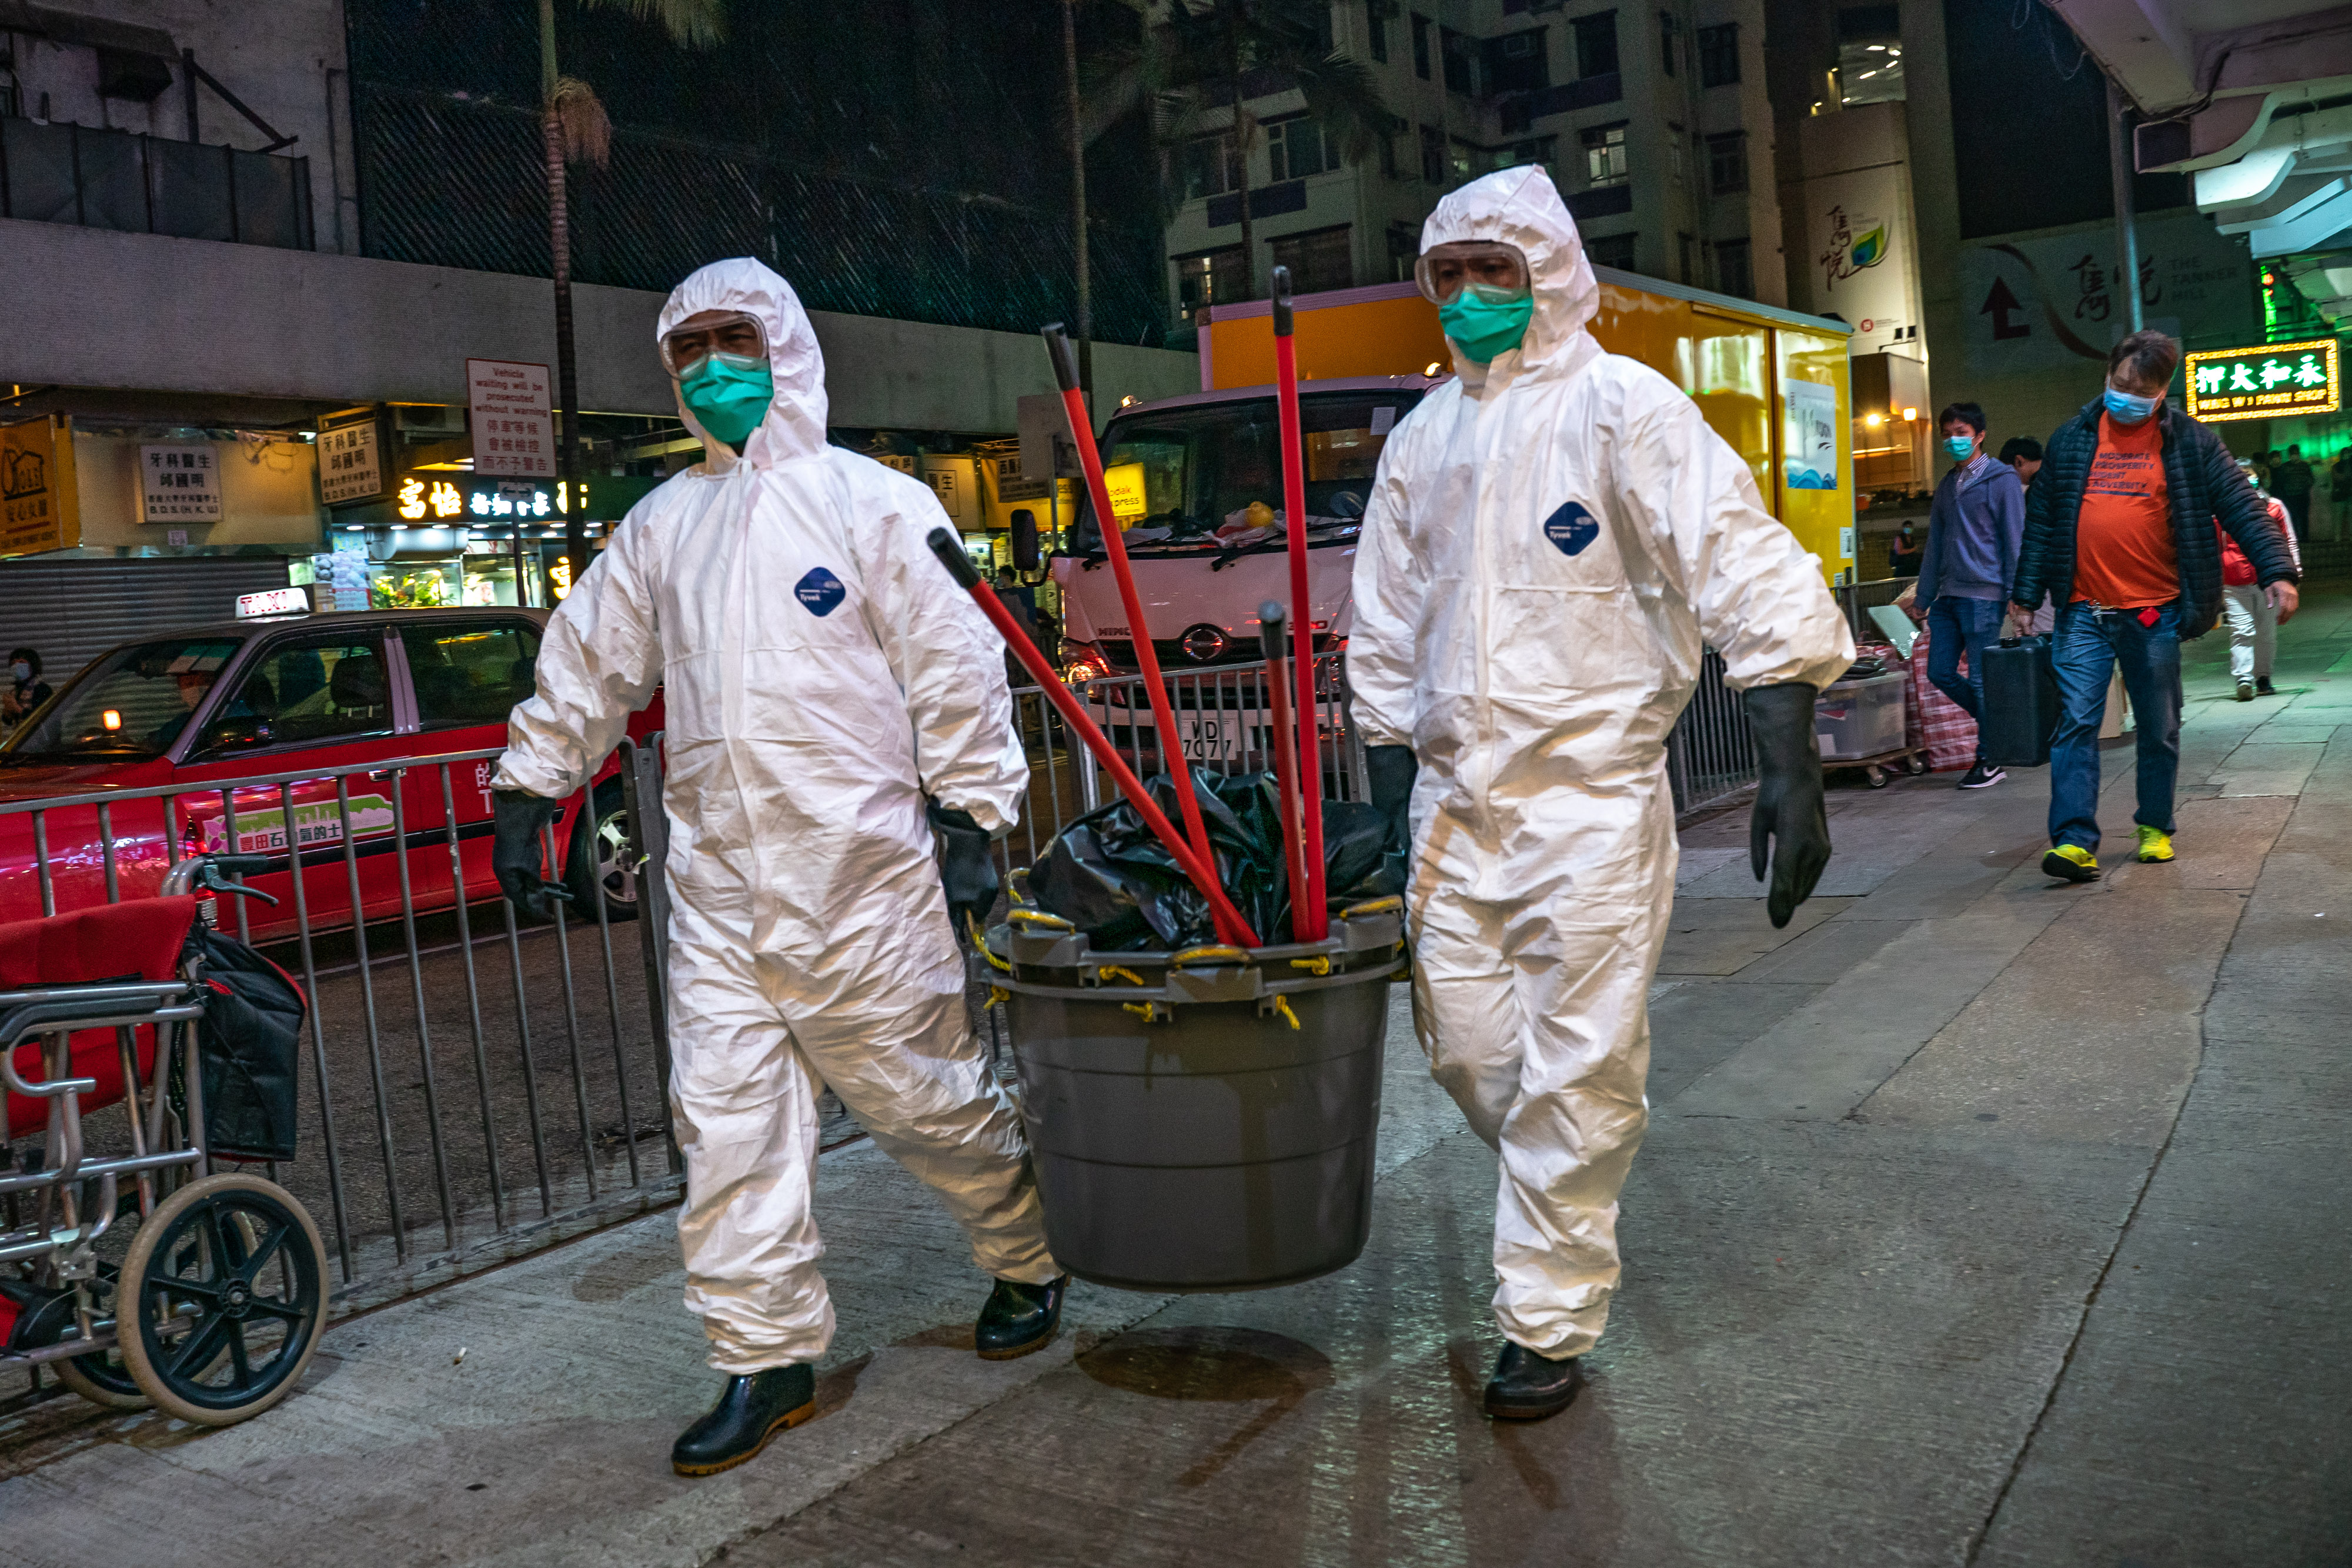 Workers wearing protective equipment carry cleaning supplies into a residential building in Hong Kong.